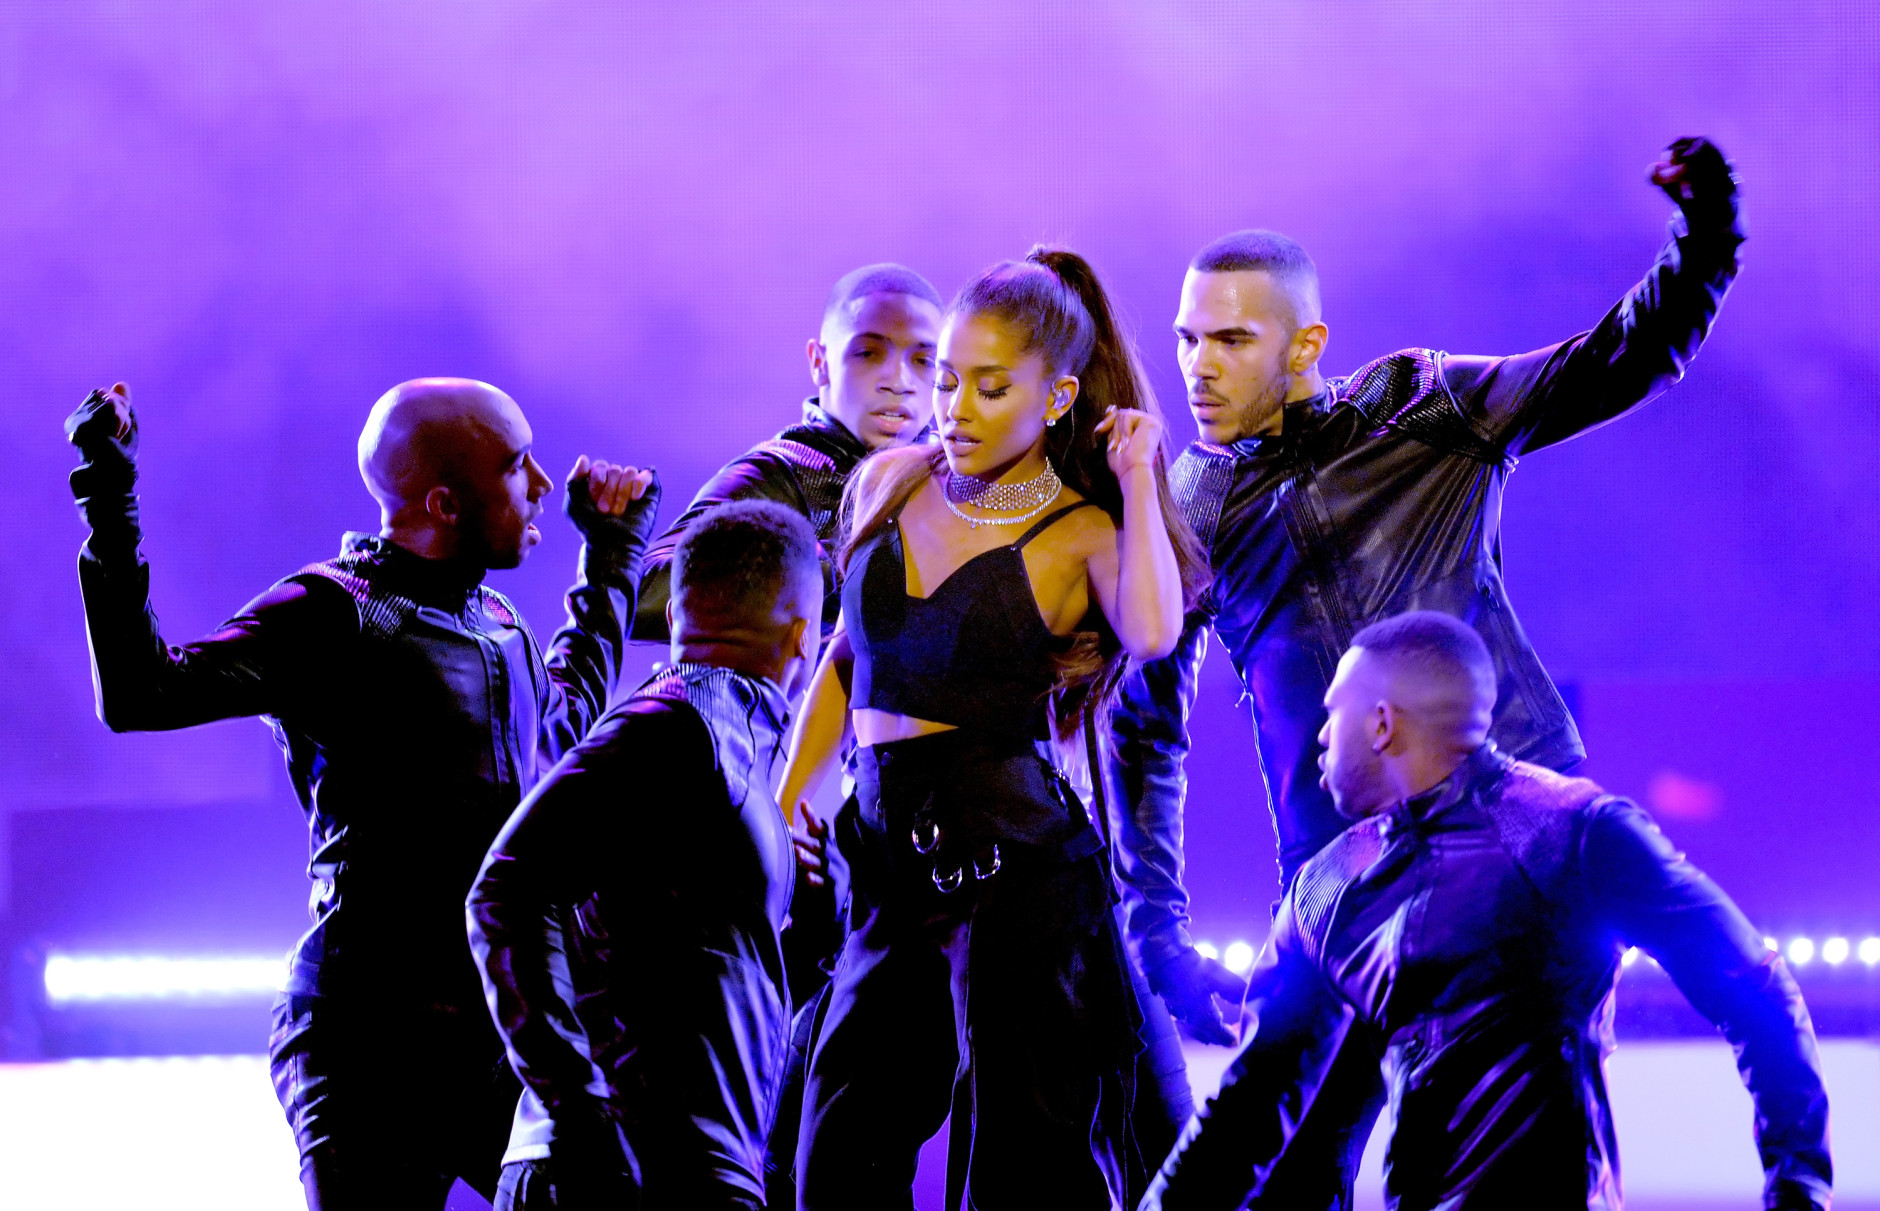 LAS VEGAS, NV - MAY 22:  Recording artist Ariana Grande performs onstage during the 2016 Billboard Music Awards at T-Mobile Arena on May 22, 2016 in Las Vegas, Nevada.  (Photo by Kevin Winter/Getty Images)